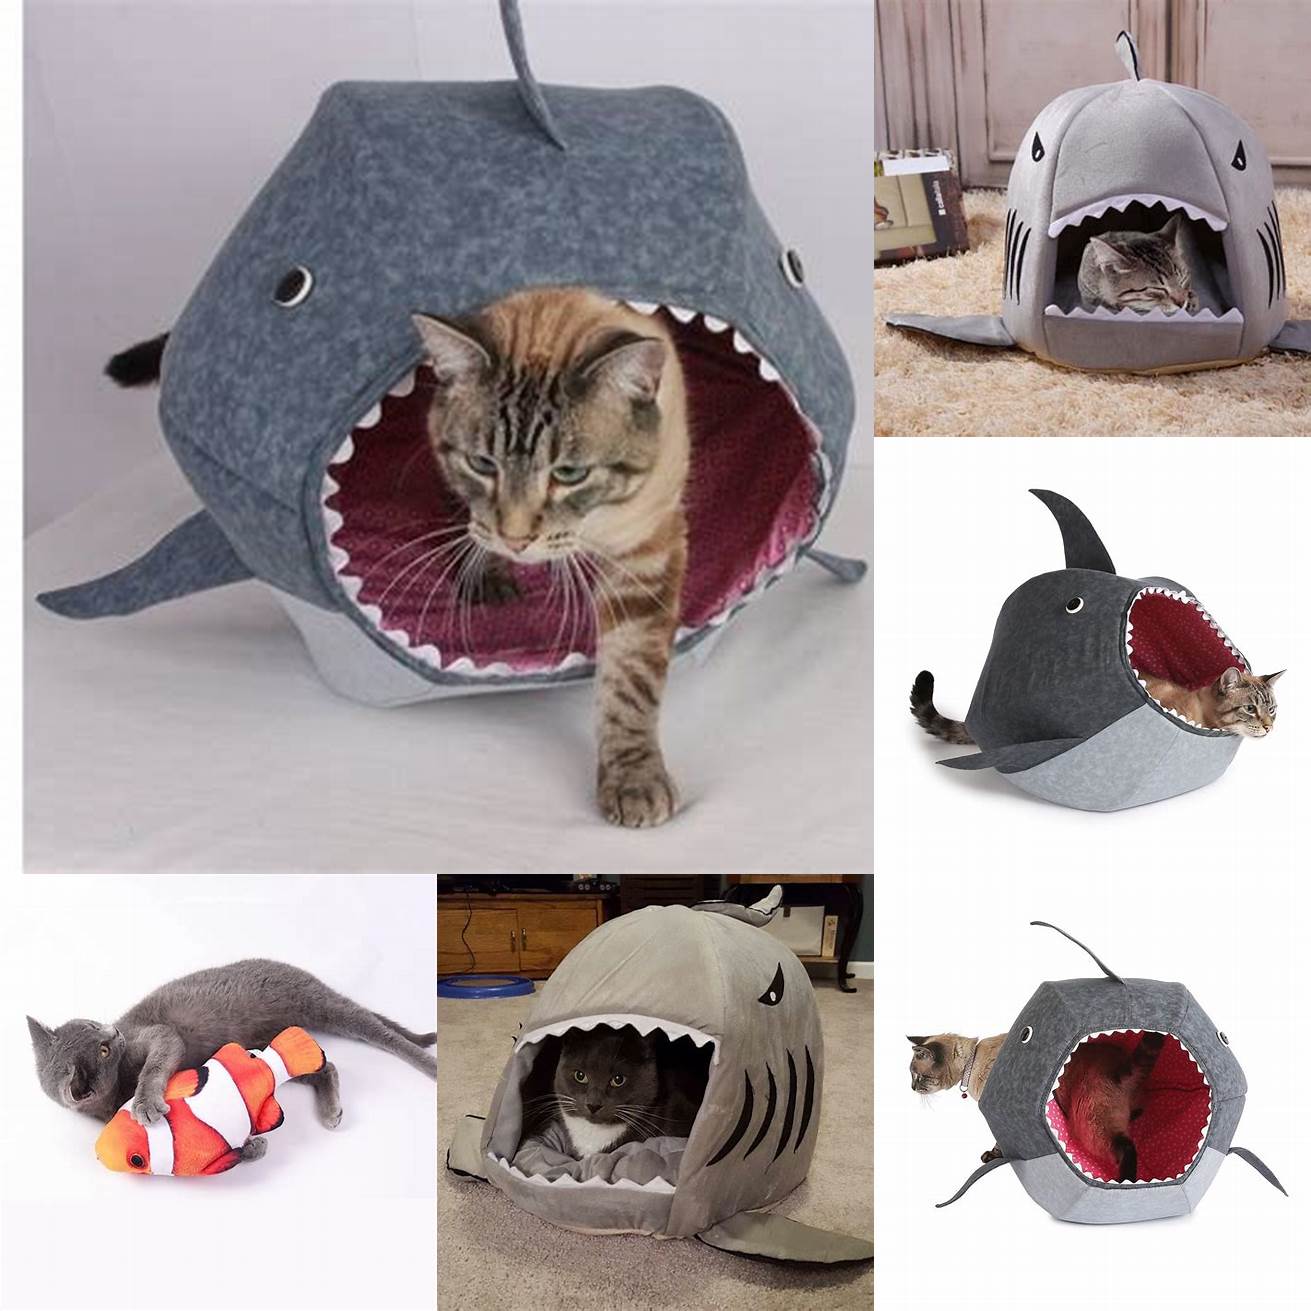 A Siamese cat with a toy fish inside a shark bed